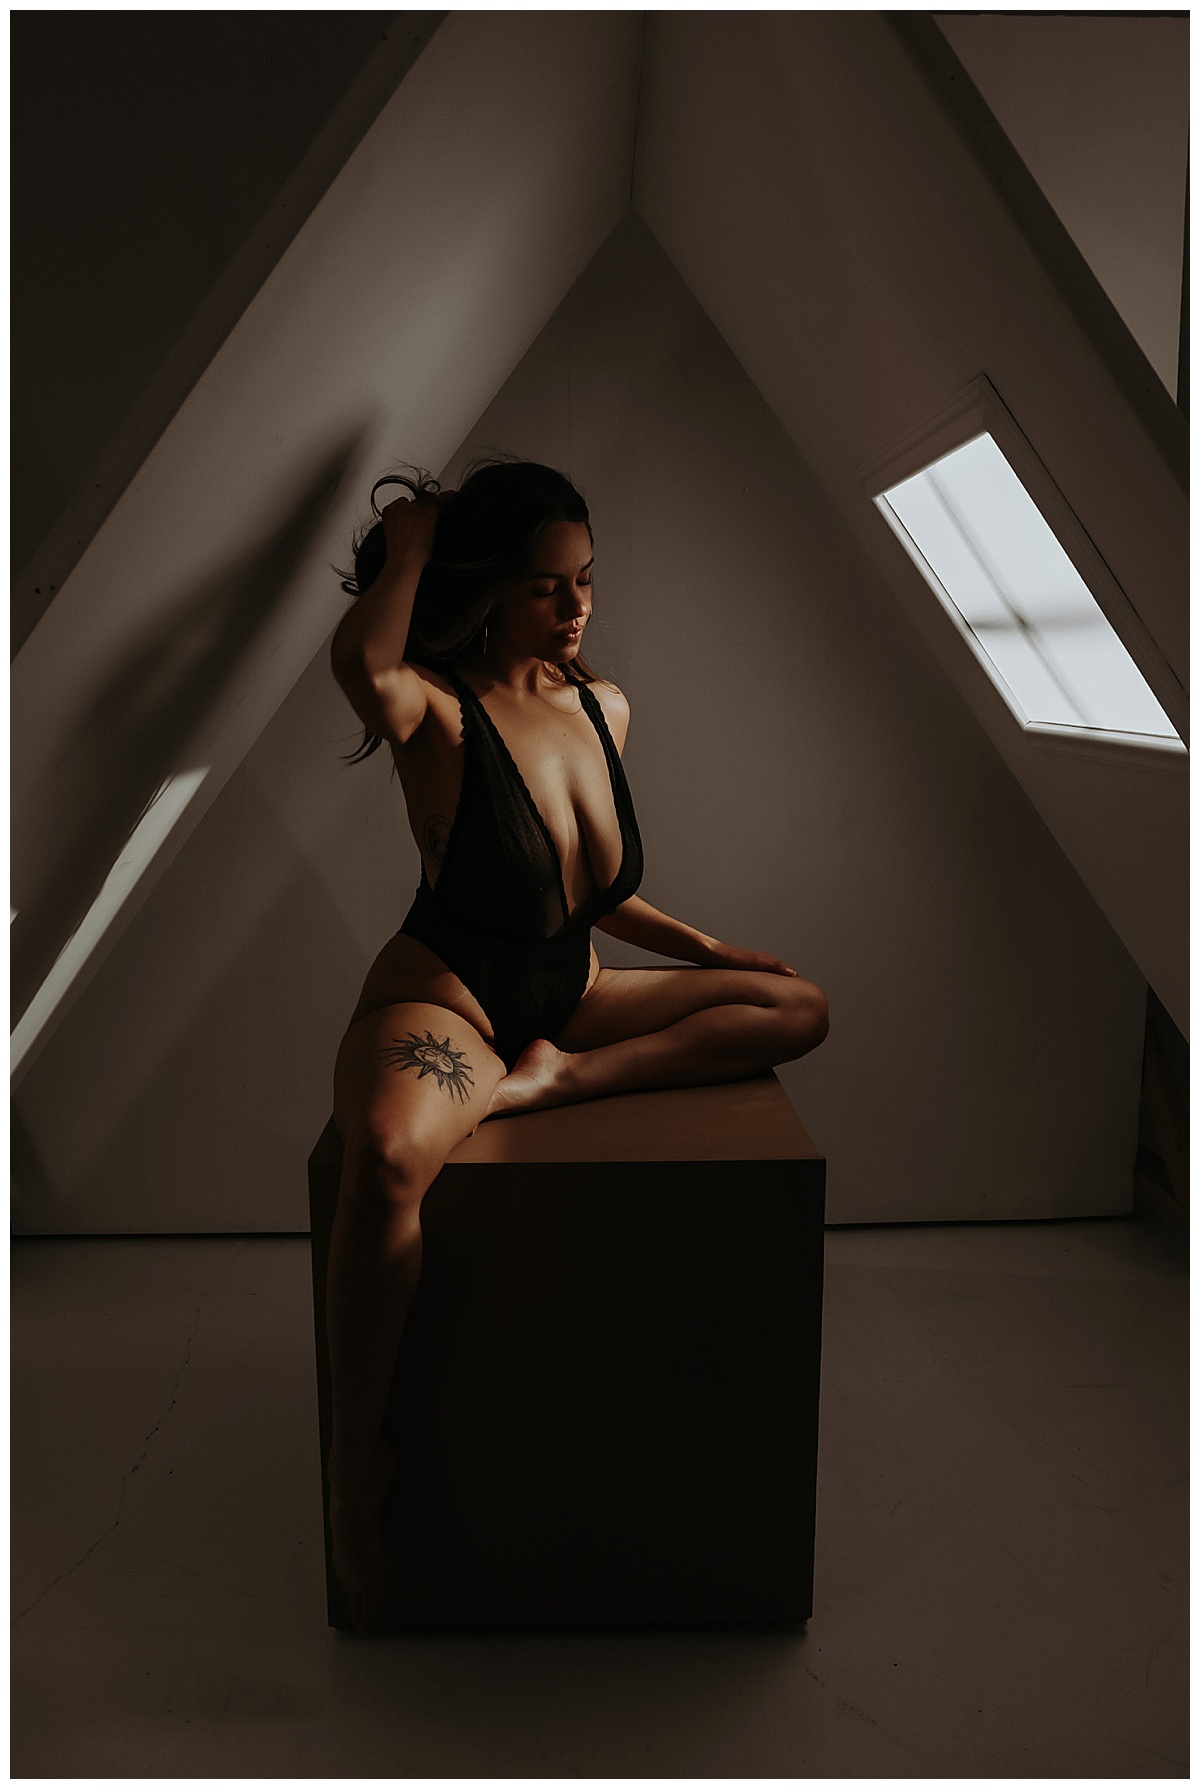 Lady runs fingers through hair in black lingerie for Sultry Skylight Session